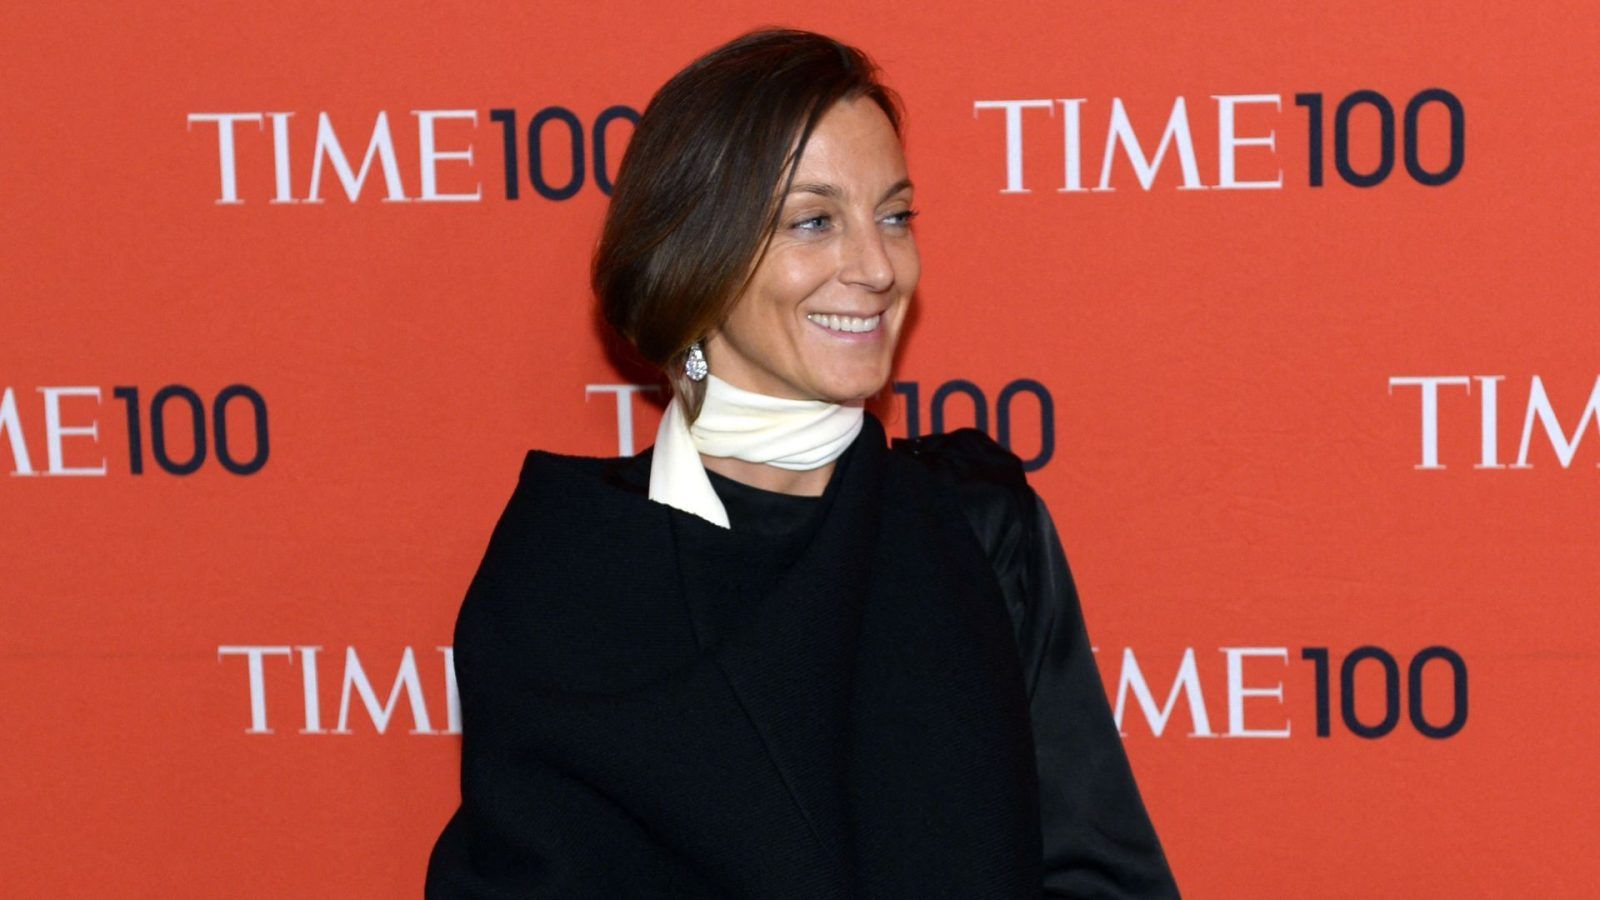 Phoebe Philo's 2023 collection is finally here – ART IS ALIVE